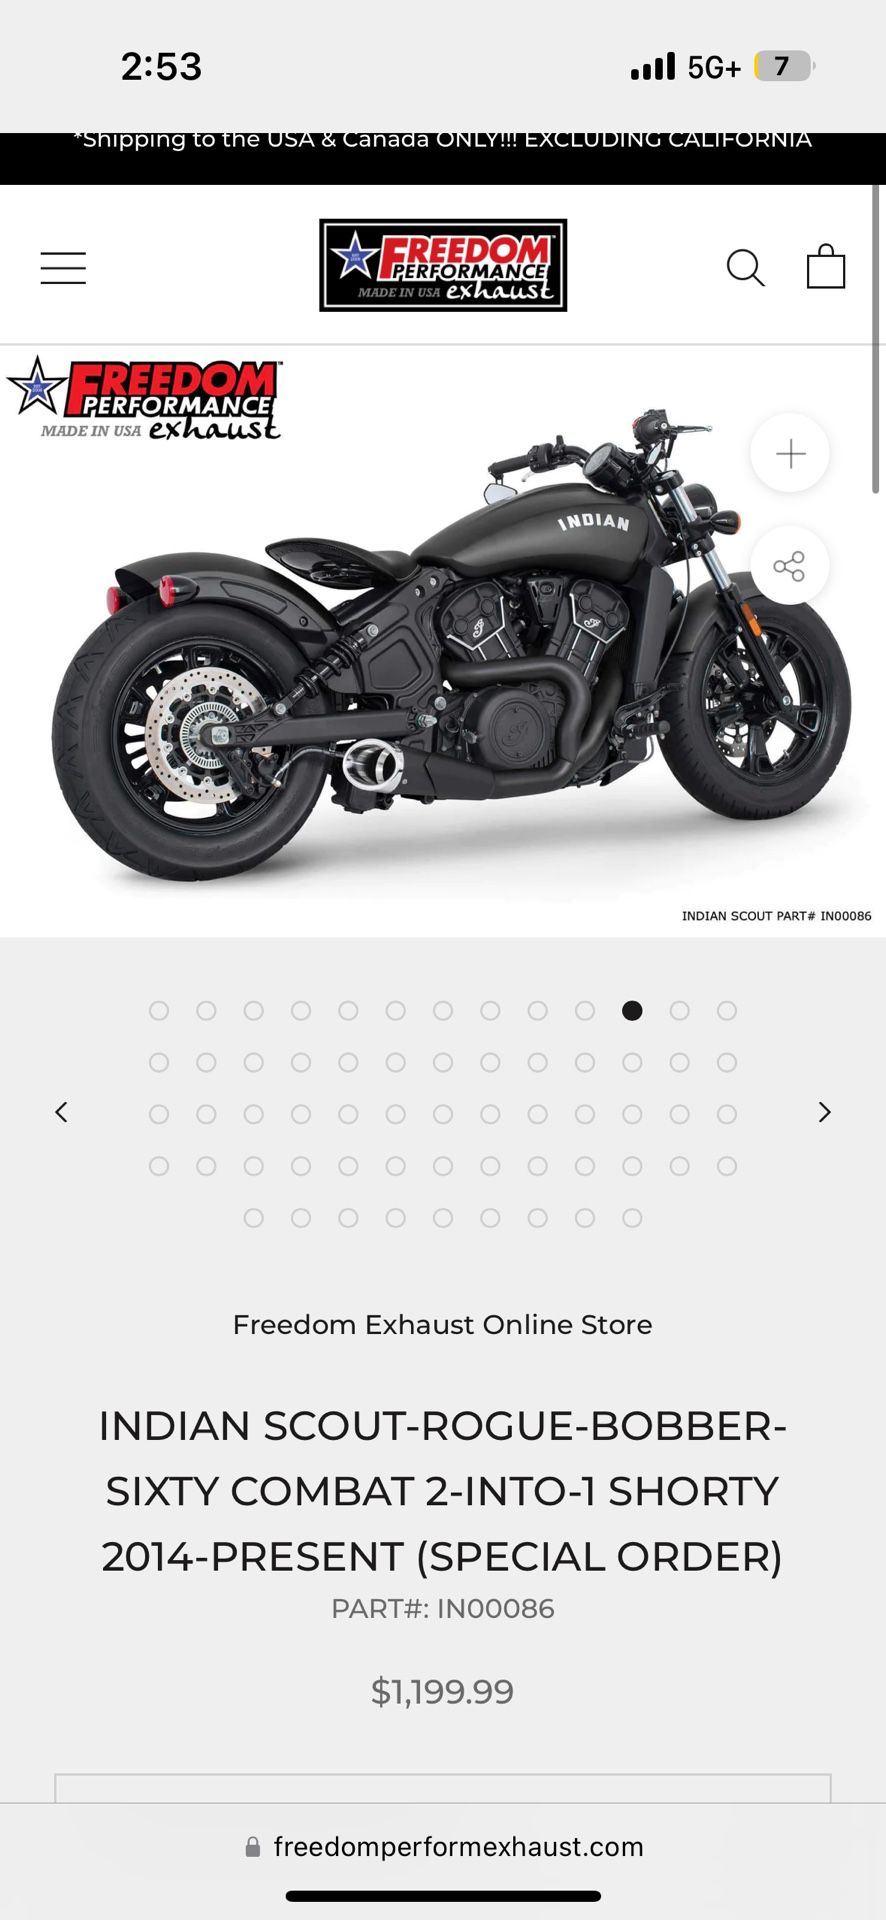 INDIAN SCOUT-ROGUE-BOBBER-SIXTY COMBAT 2-INTO-1 SHORTY 2014-PRESENT